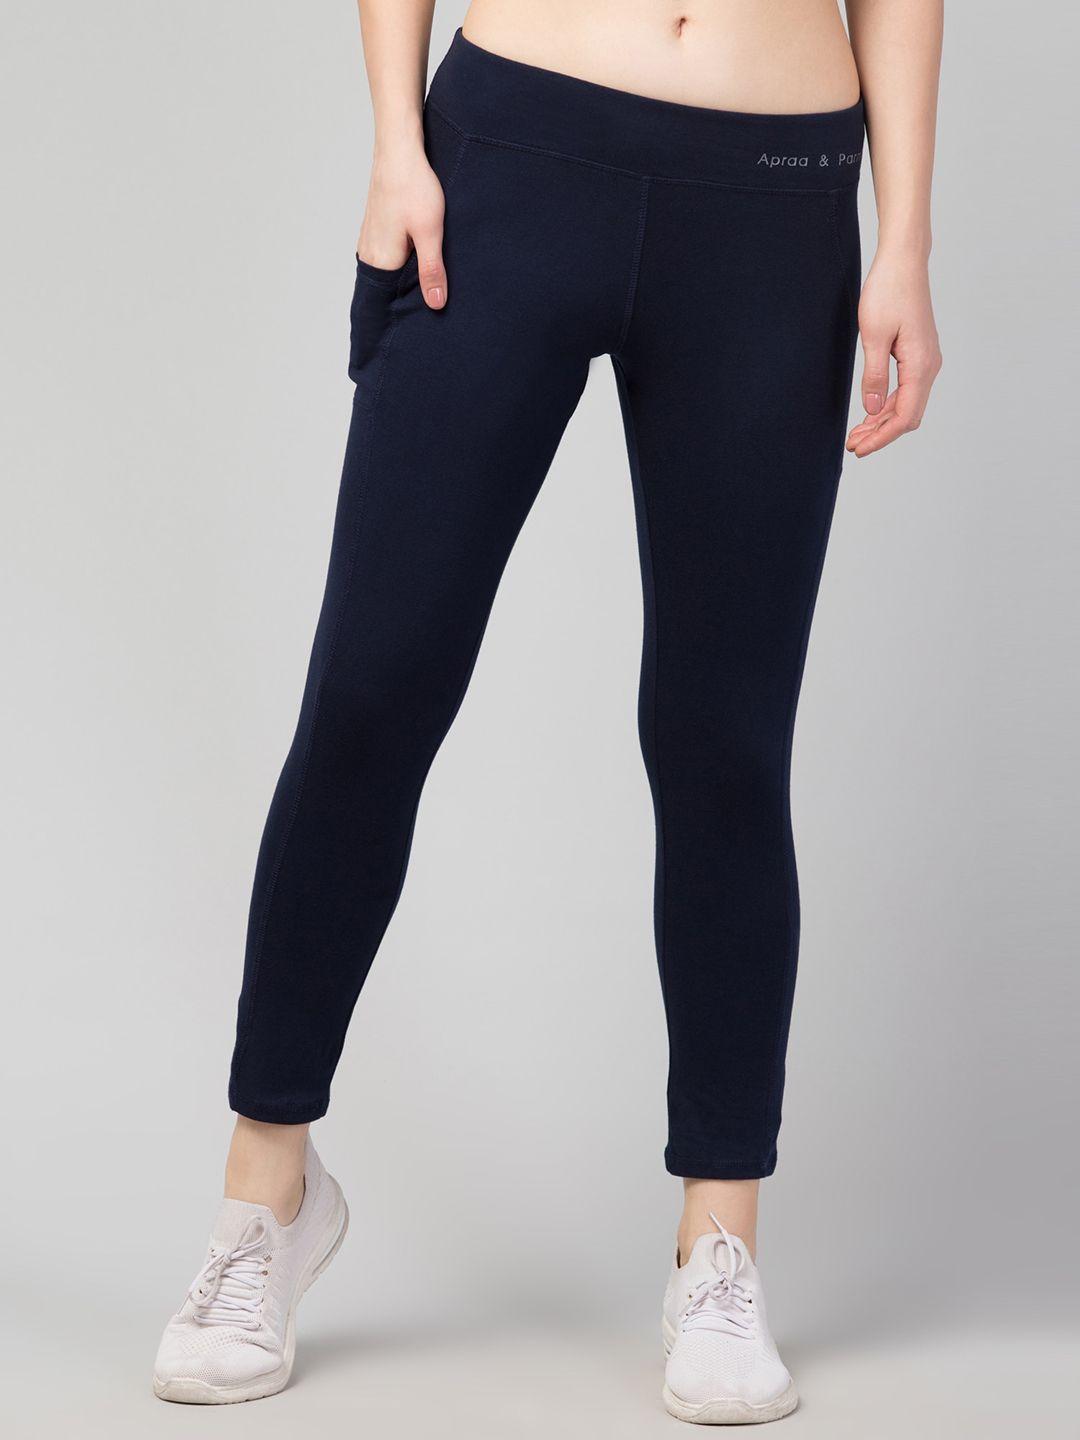 apraa & parma women tights with pockets